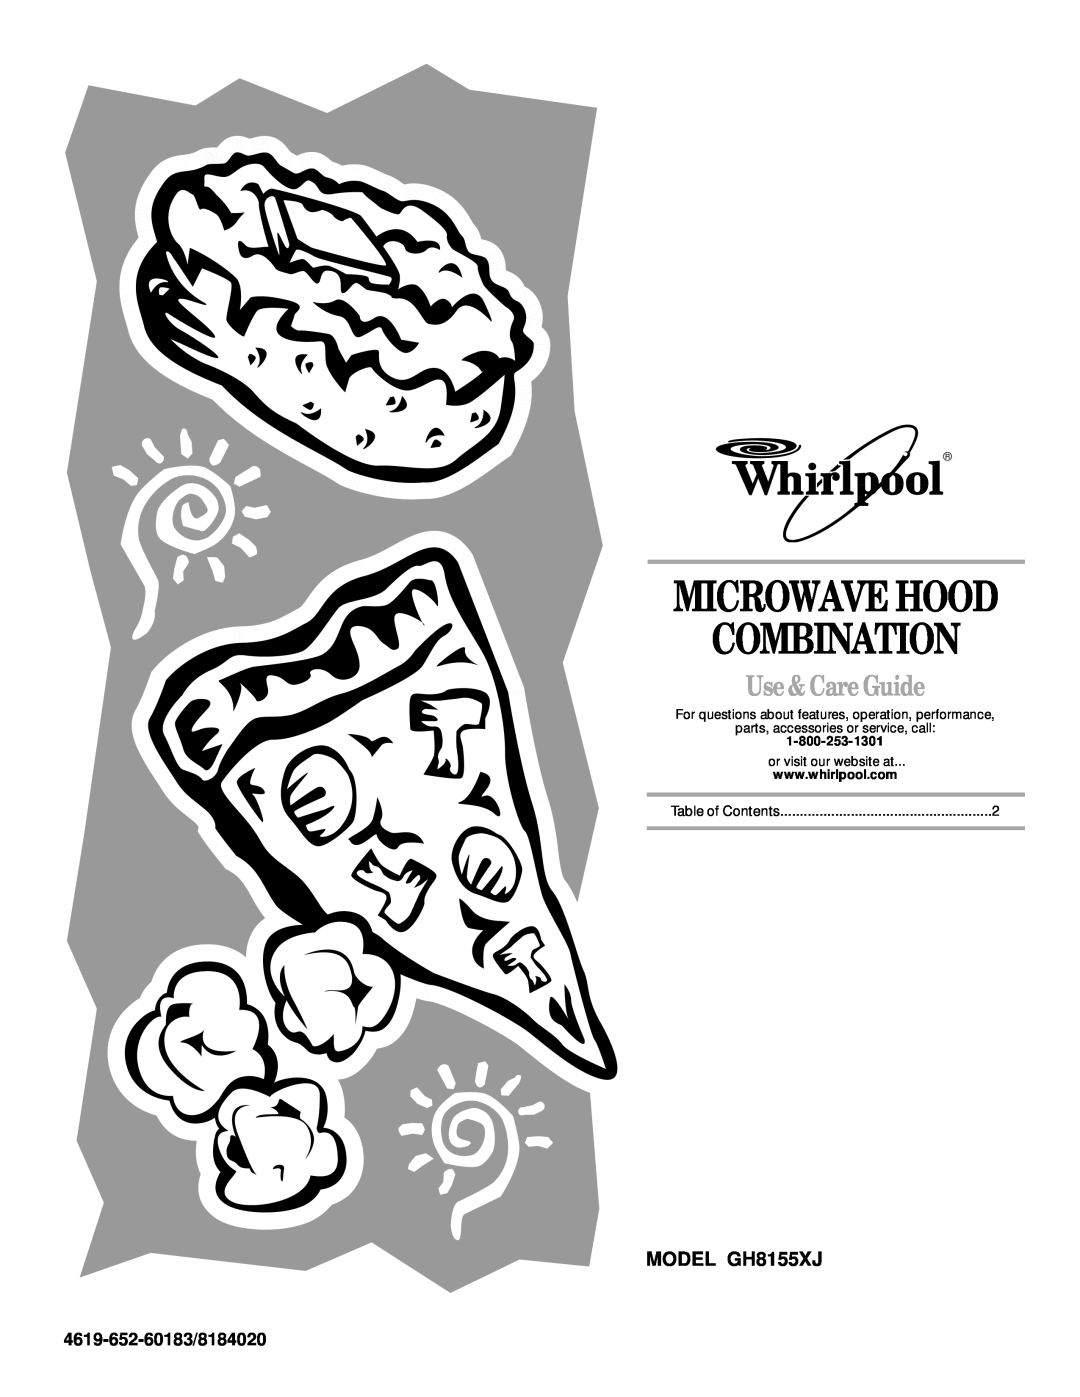 Whirlpool manual Microwave Hood Combination, Use & Care Guide, MODEL GH8155XJ, parts, accessories or service, call 